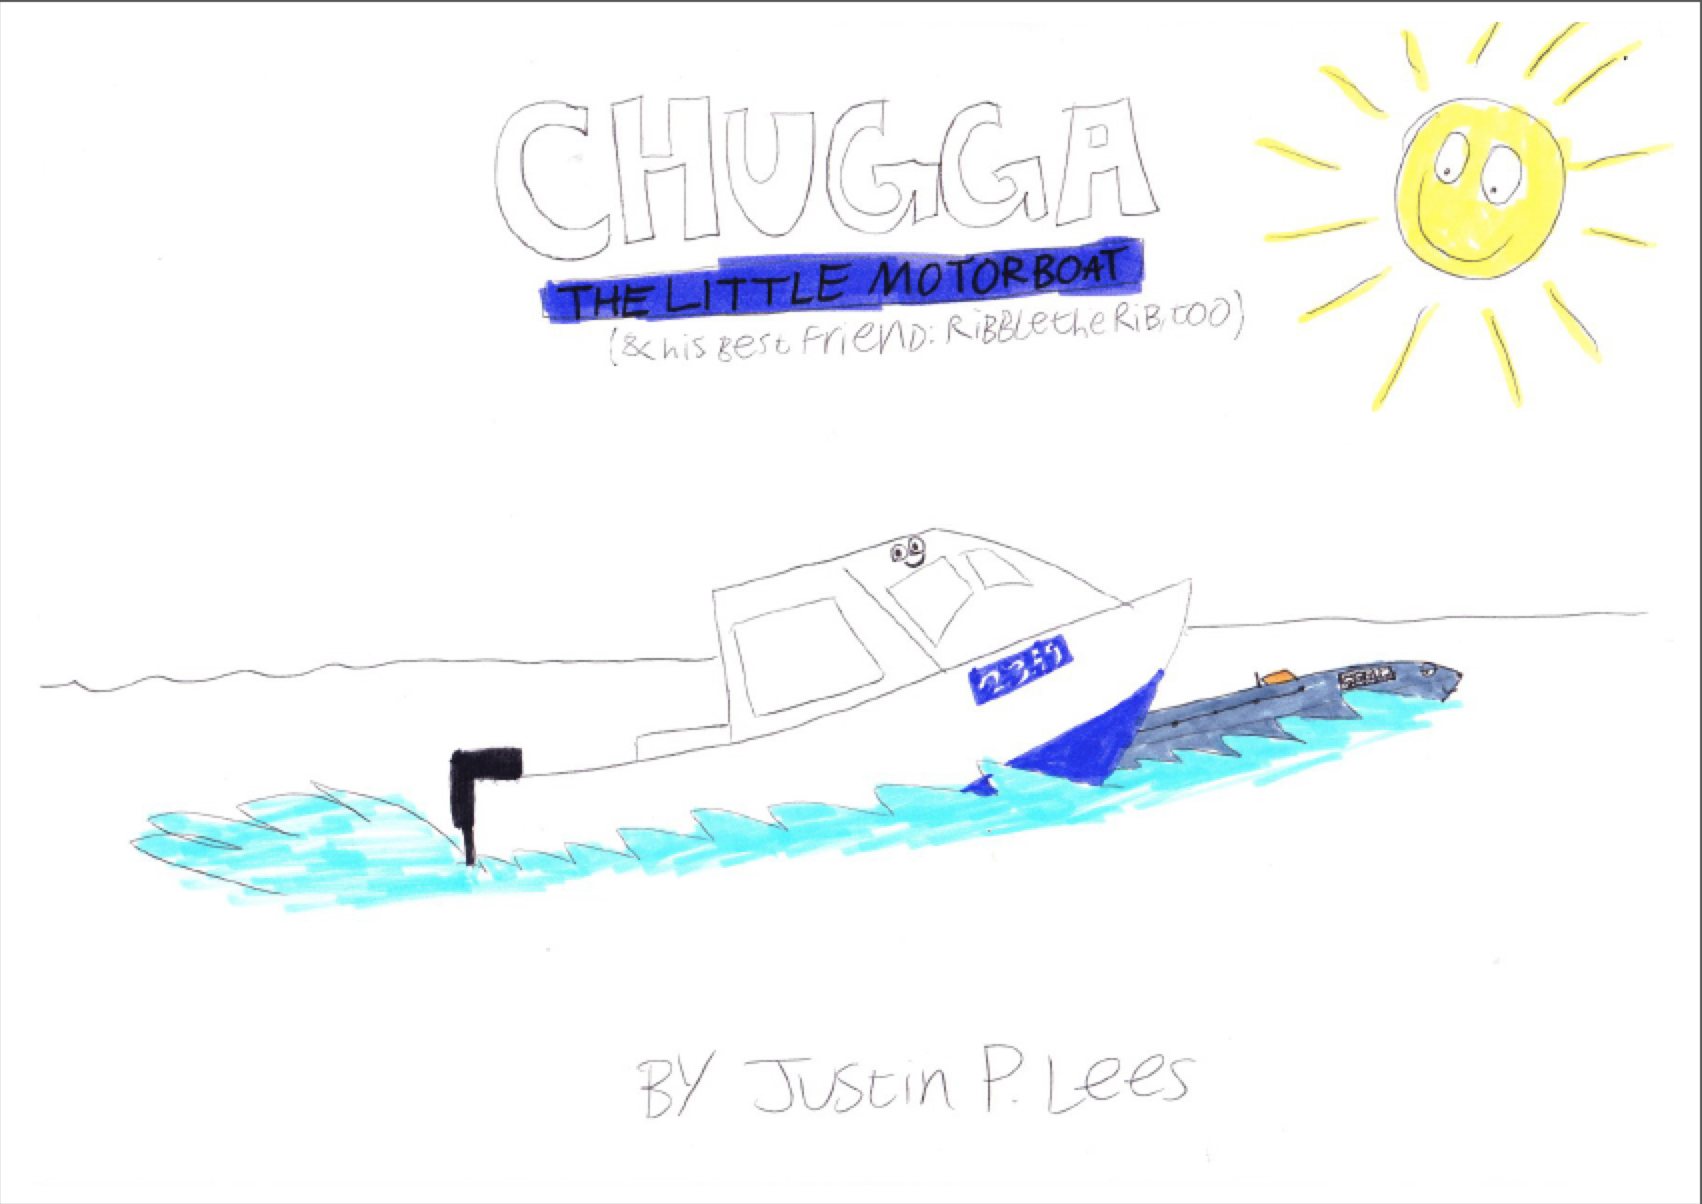 Chugga the Little Motor Boat (and his best friend; Ribble the Rib too)